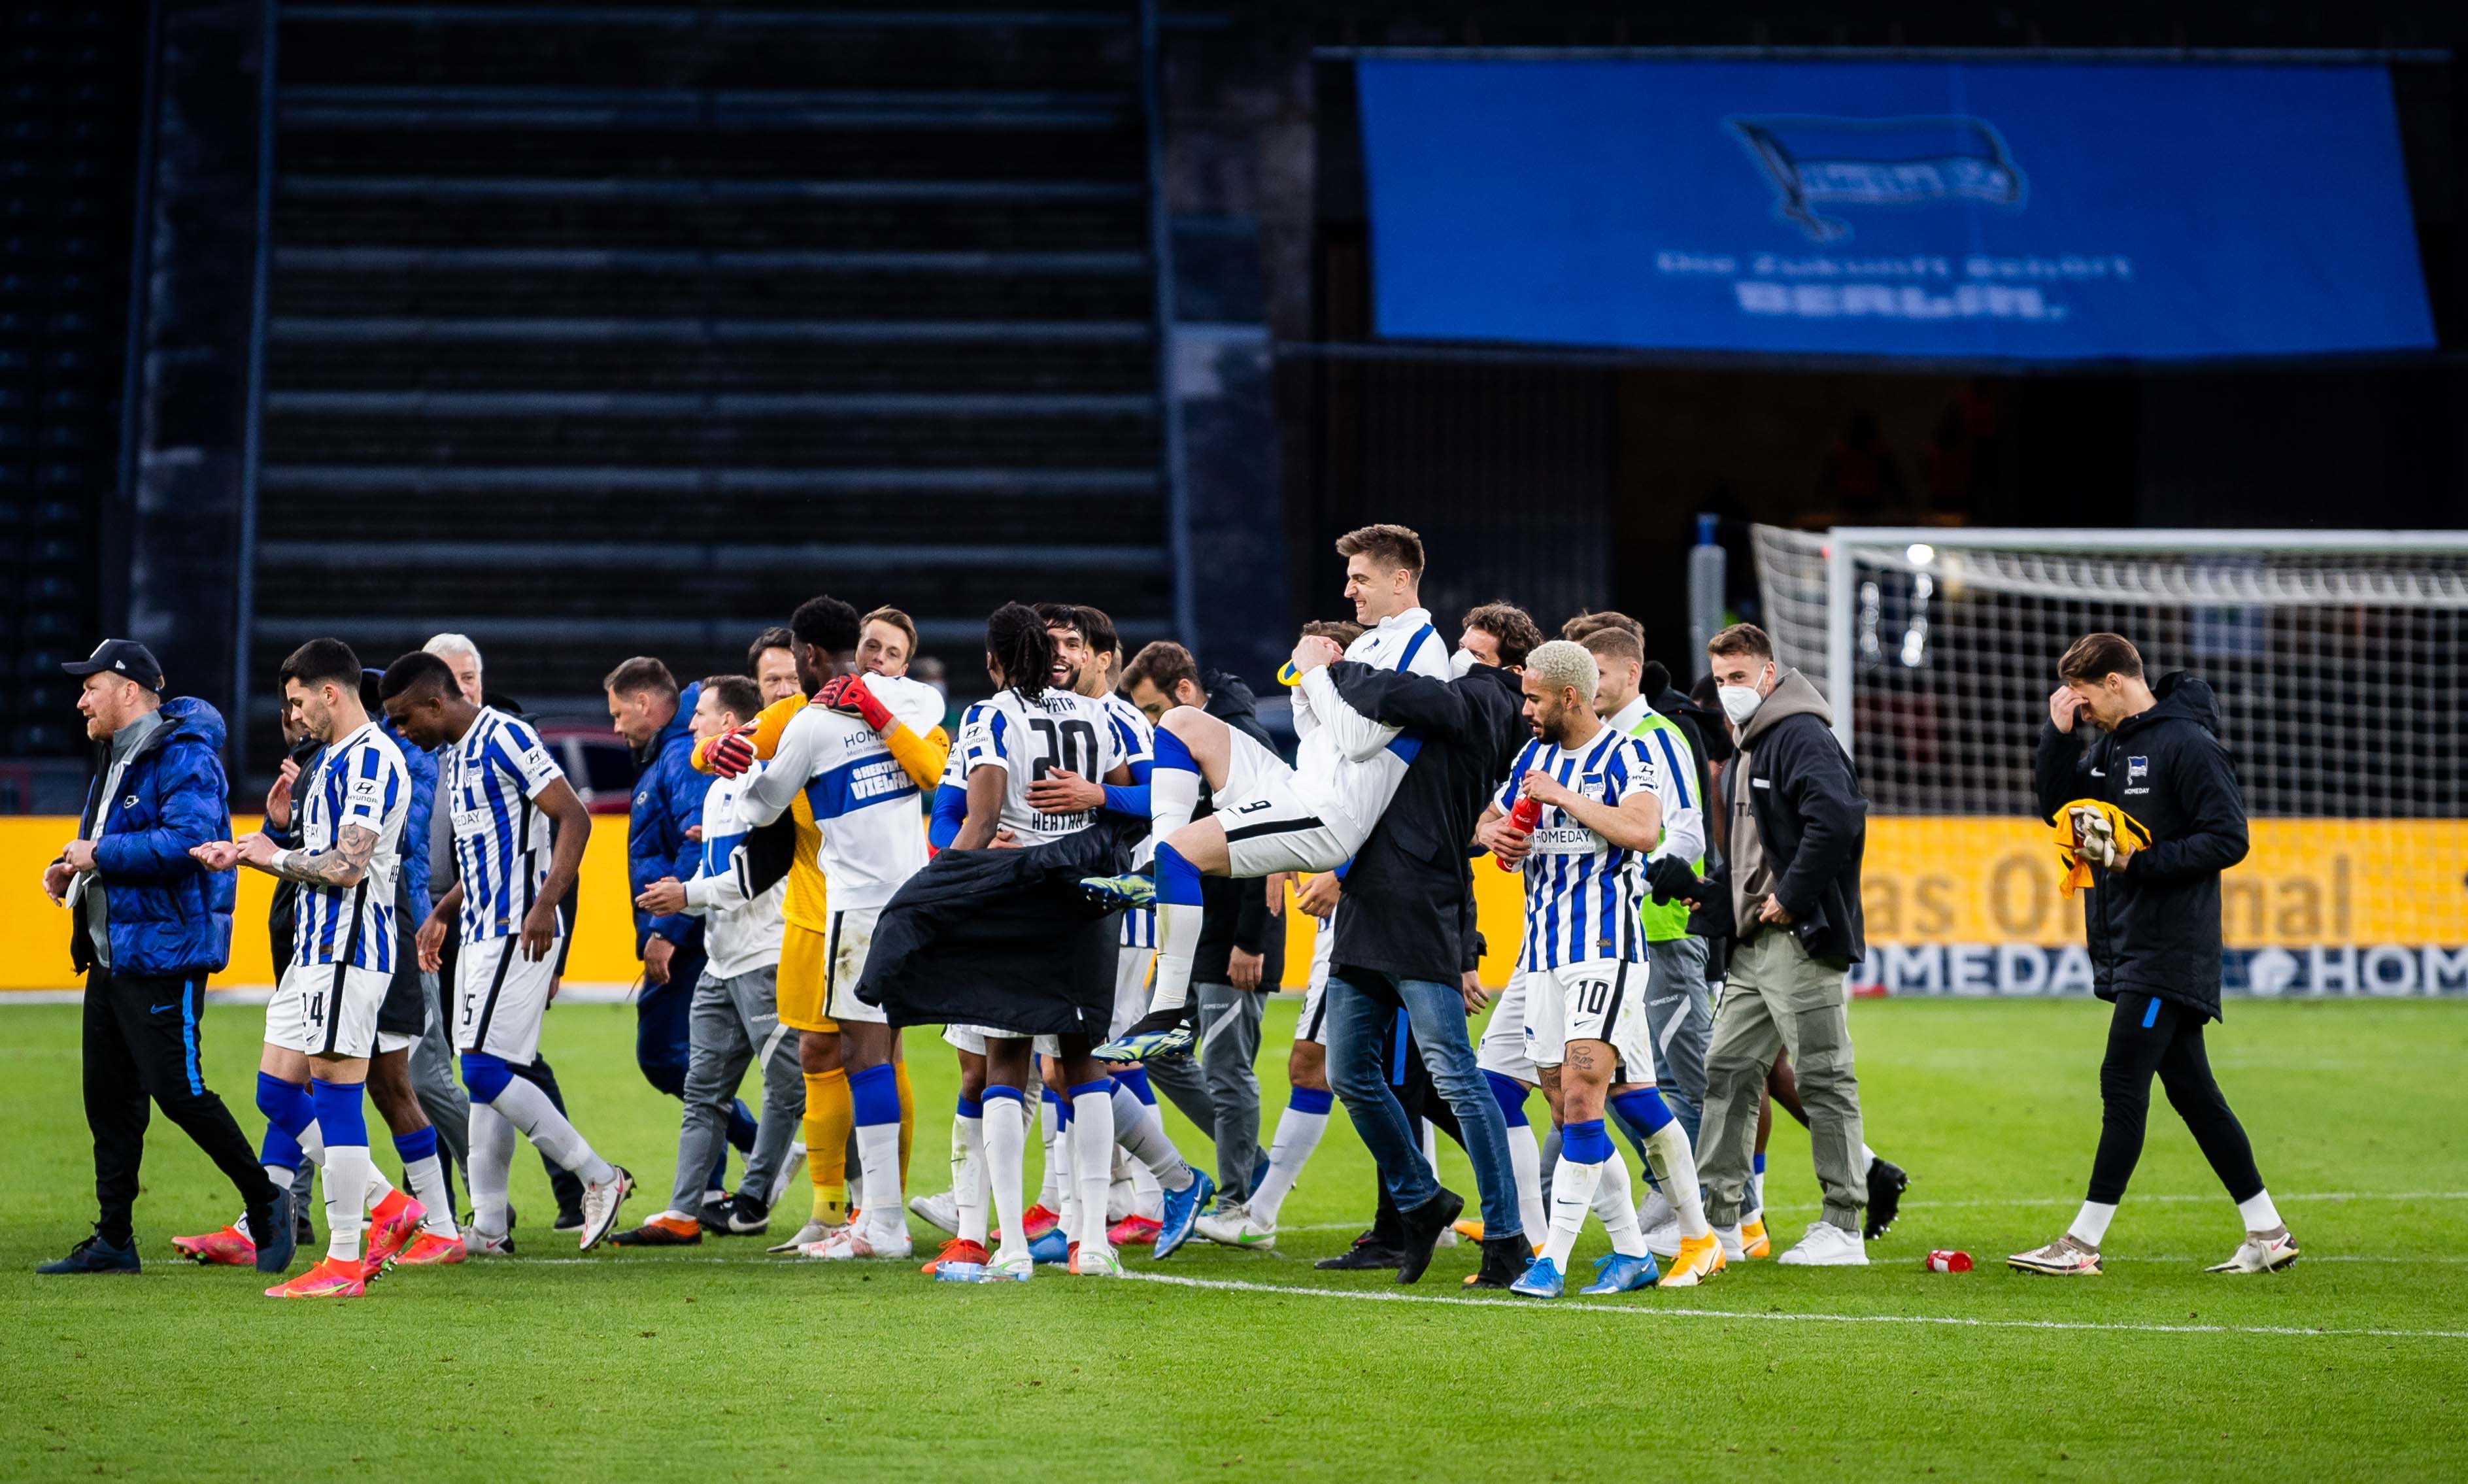 The lads celebrate together after the final whistle.